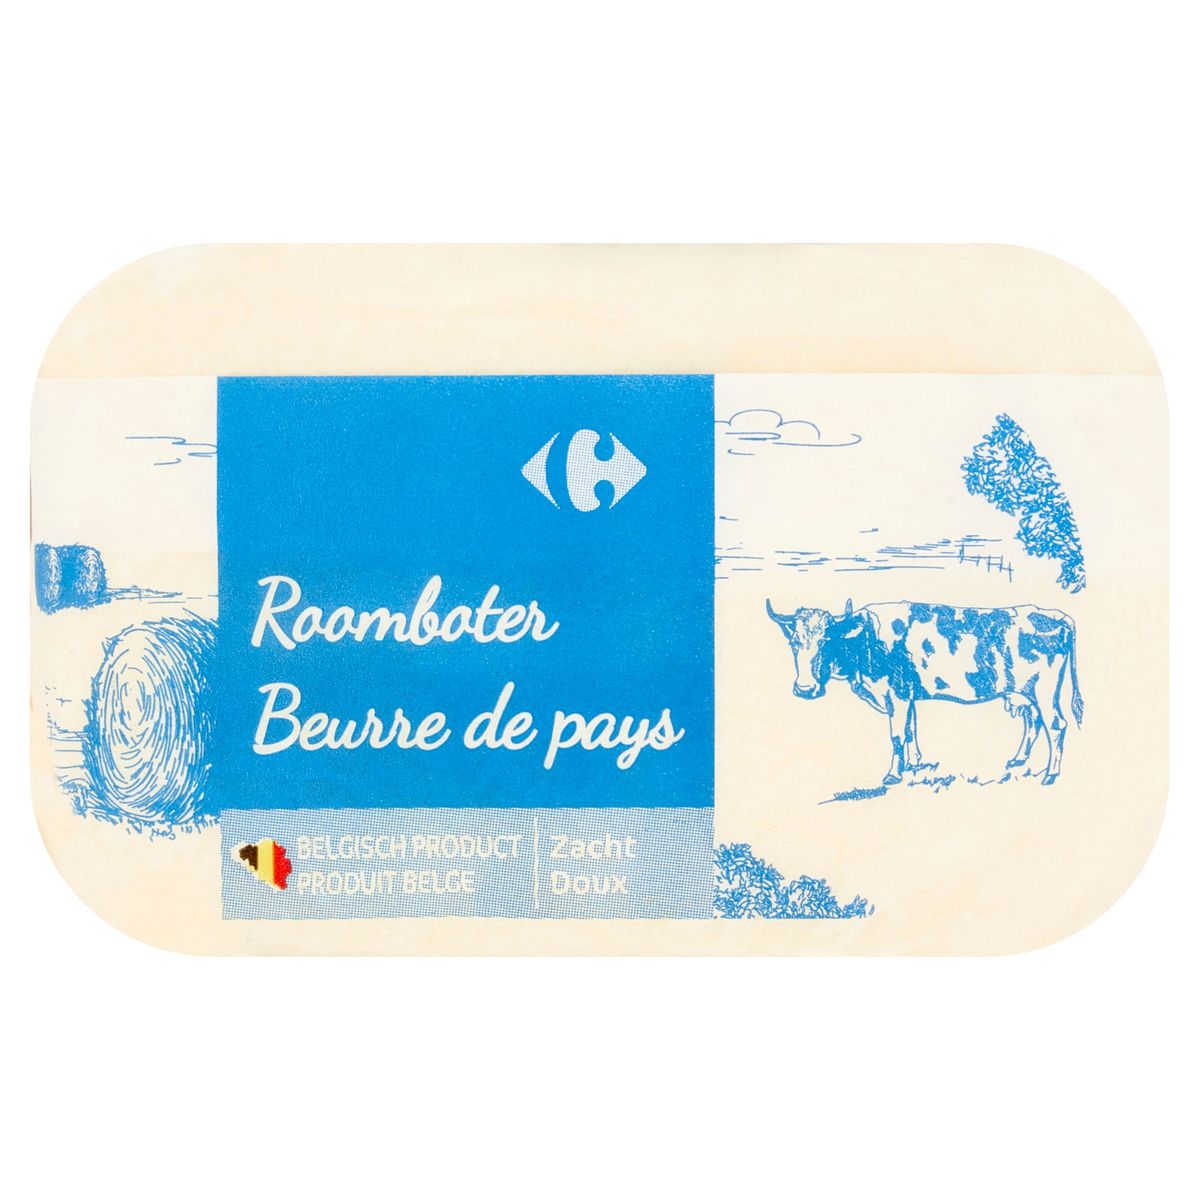 Carrefour Roomboter 500 g